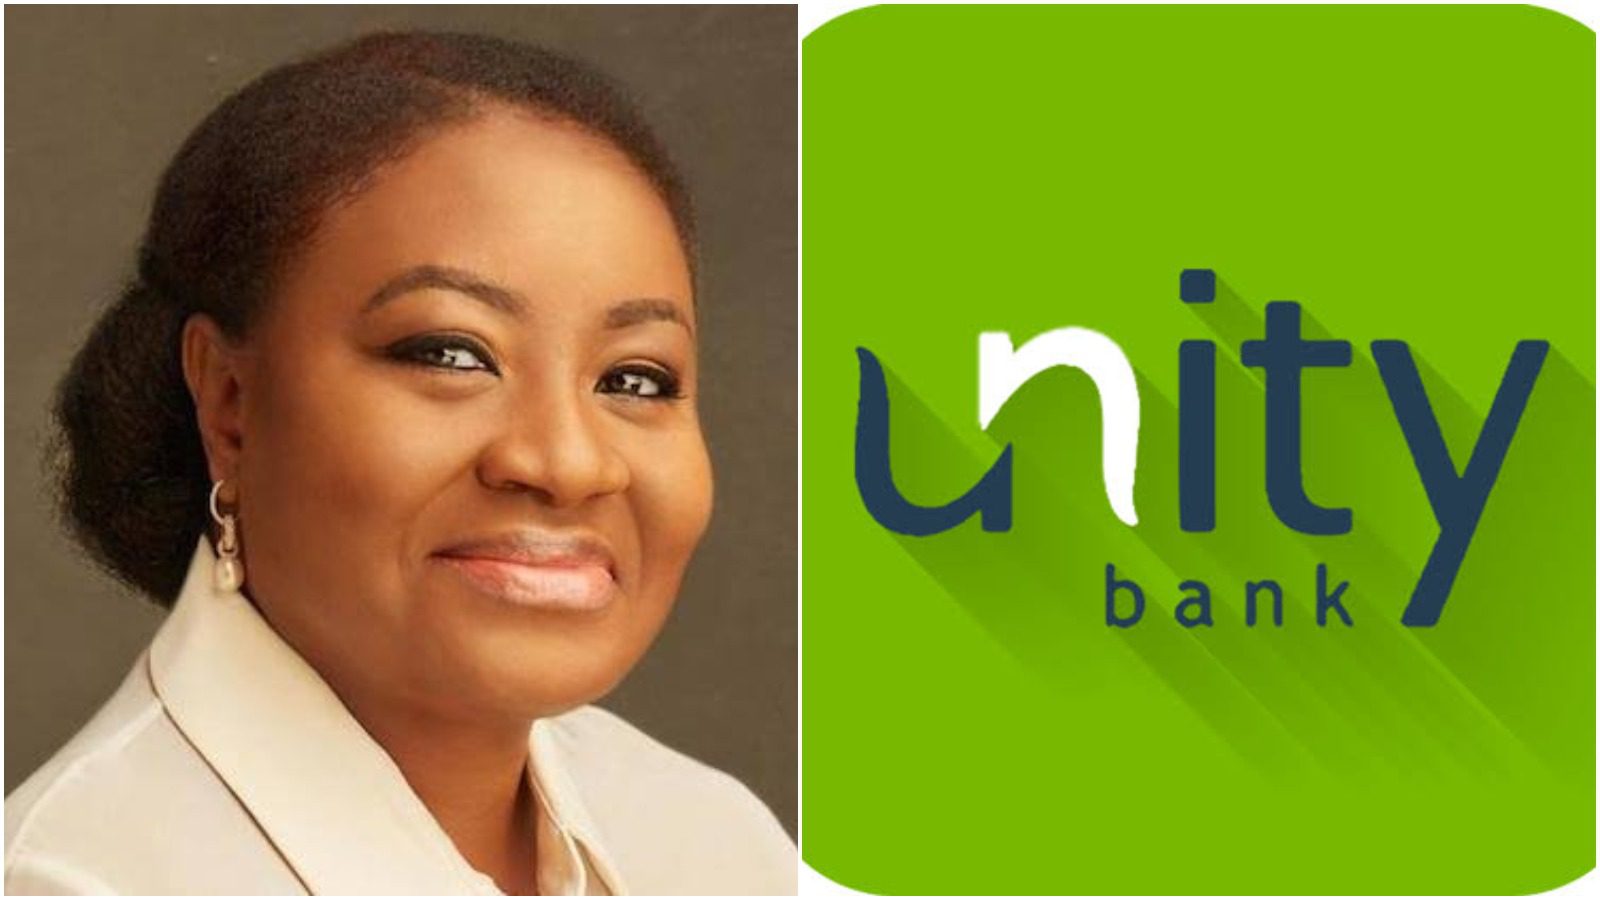 Unity bank mobile app and internet banking